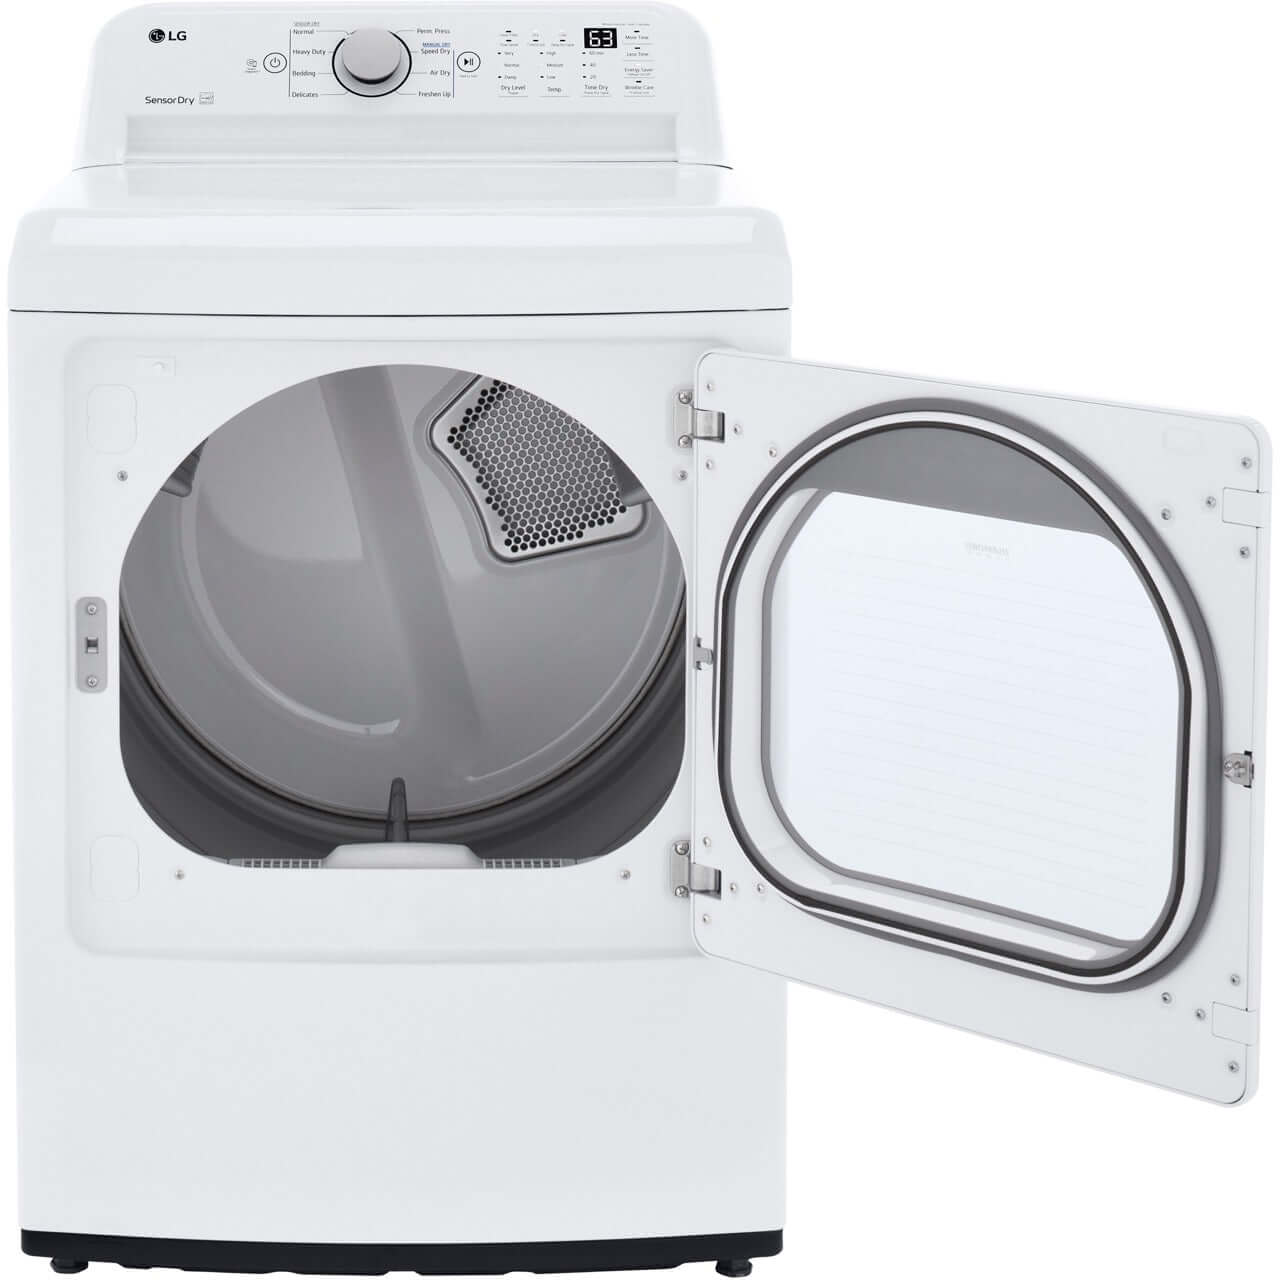 LG Electronics 7.3-Cu. Ft. Ultra Large Capacity Gas Dryer with Sensor Dry Technology (DLG7151W)